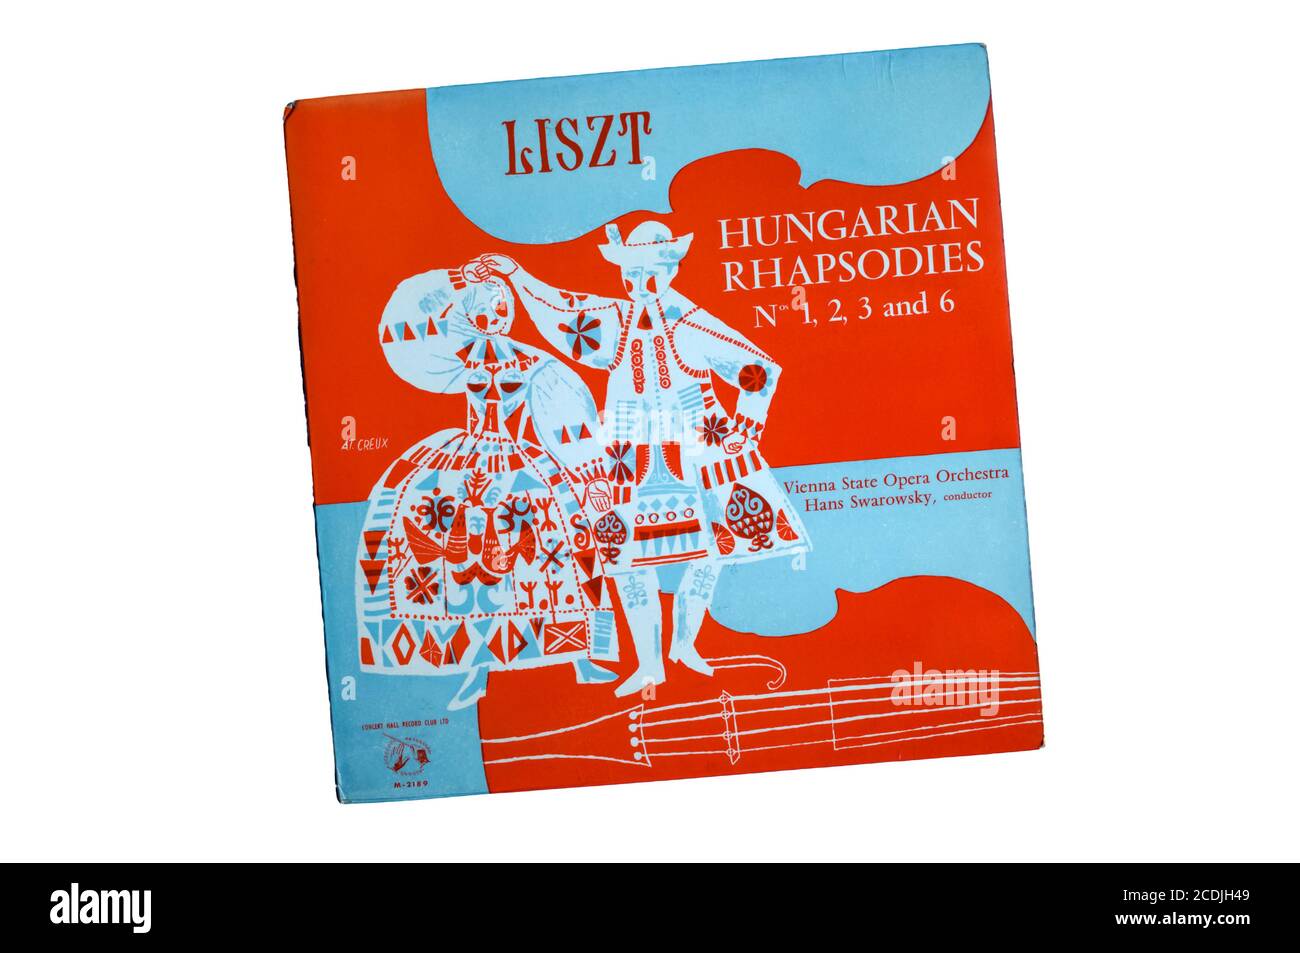 An LP of Liszt's Hungarian Rhapsodies played by the Vienna State Opera Orchestra conducted by Hans Swarowsky. Stock Photo